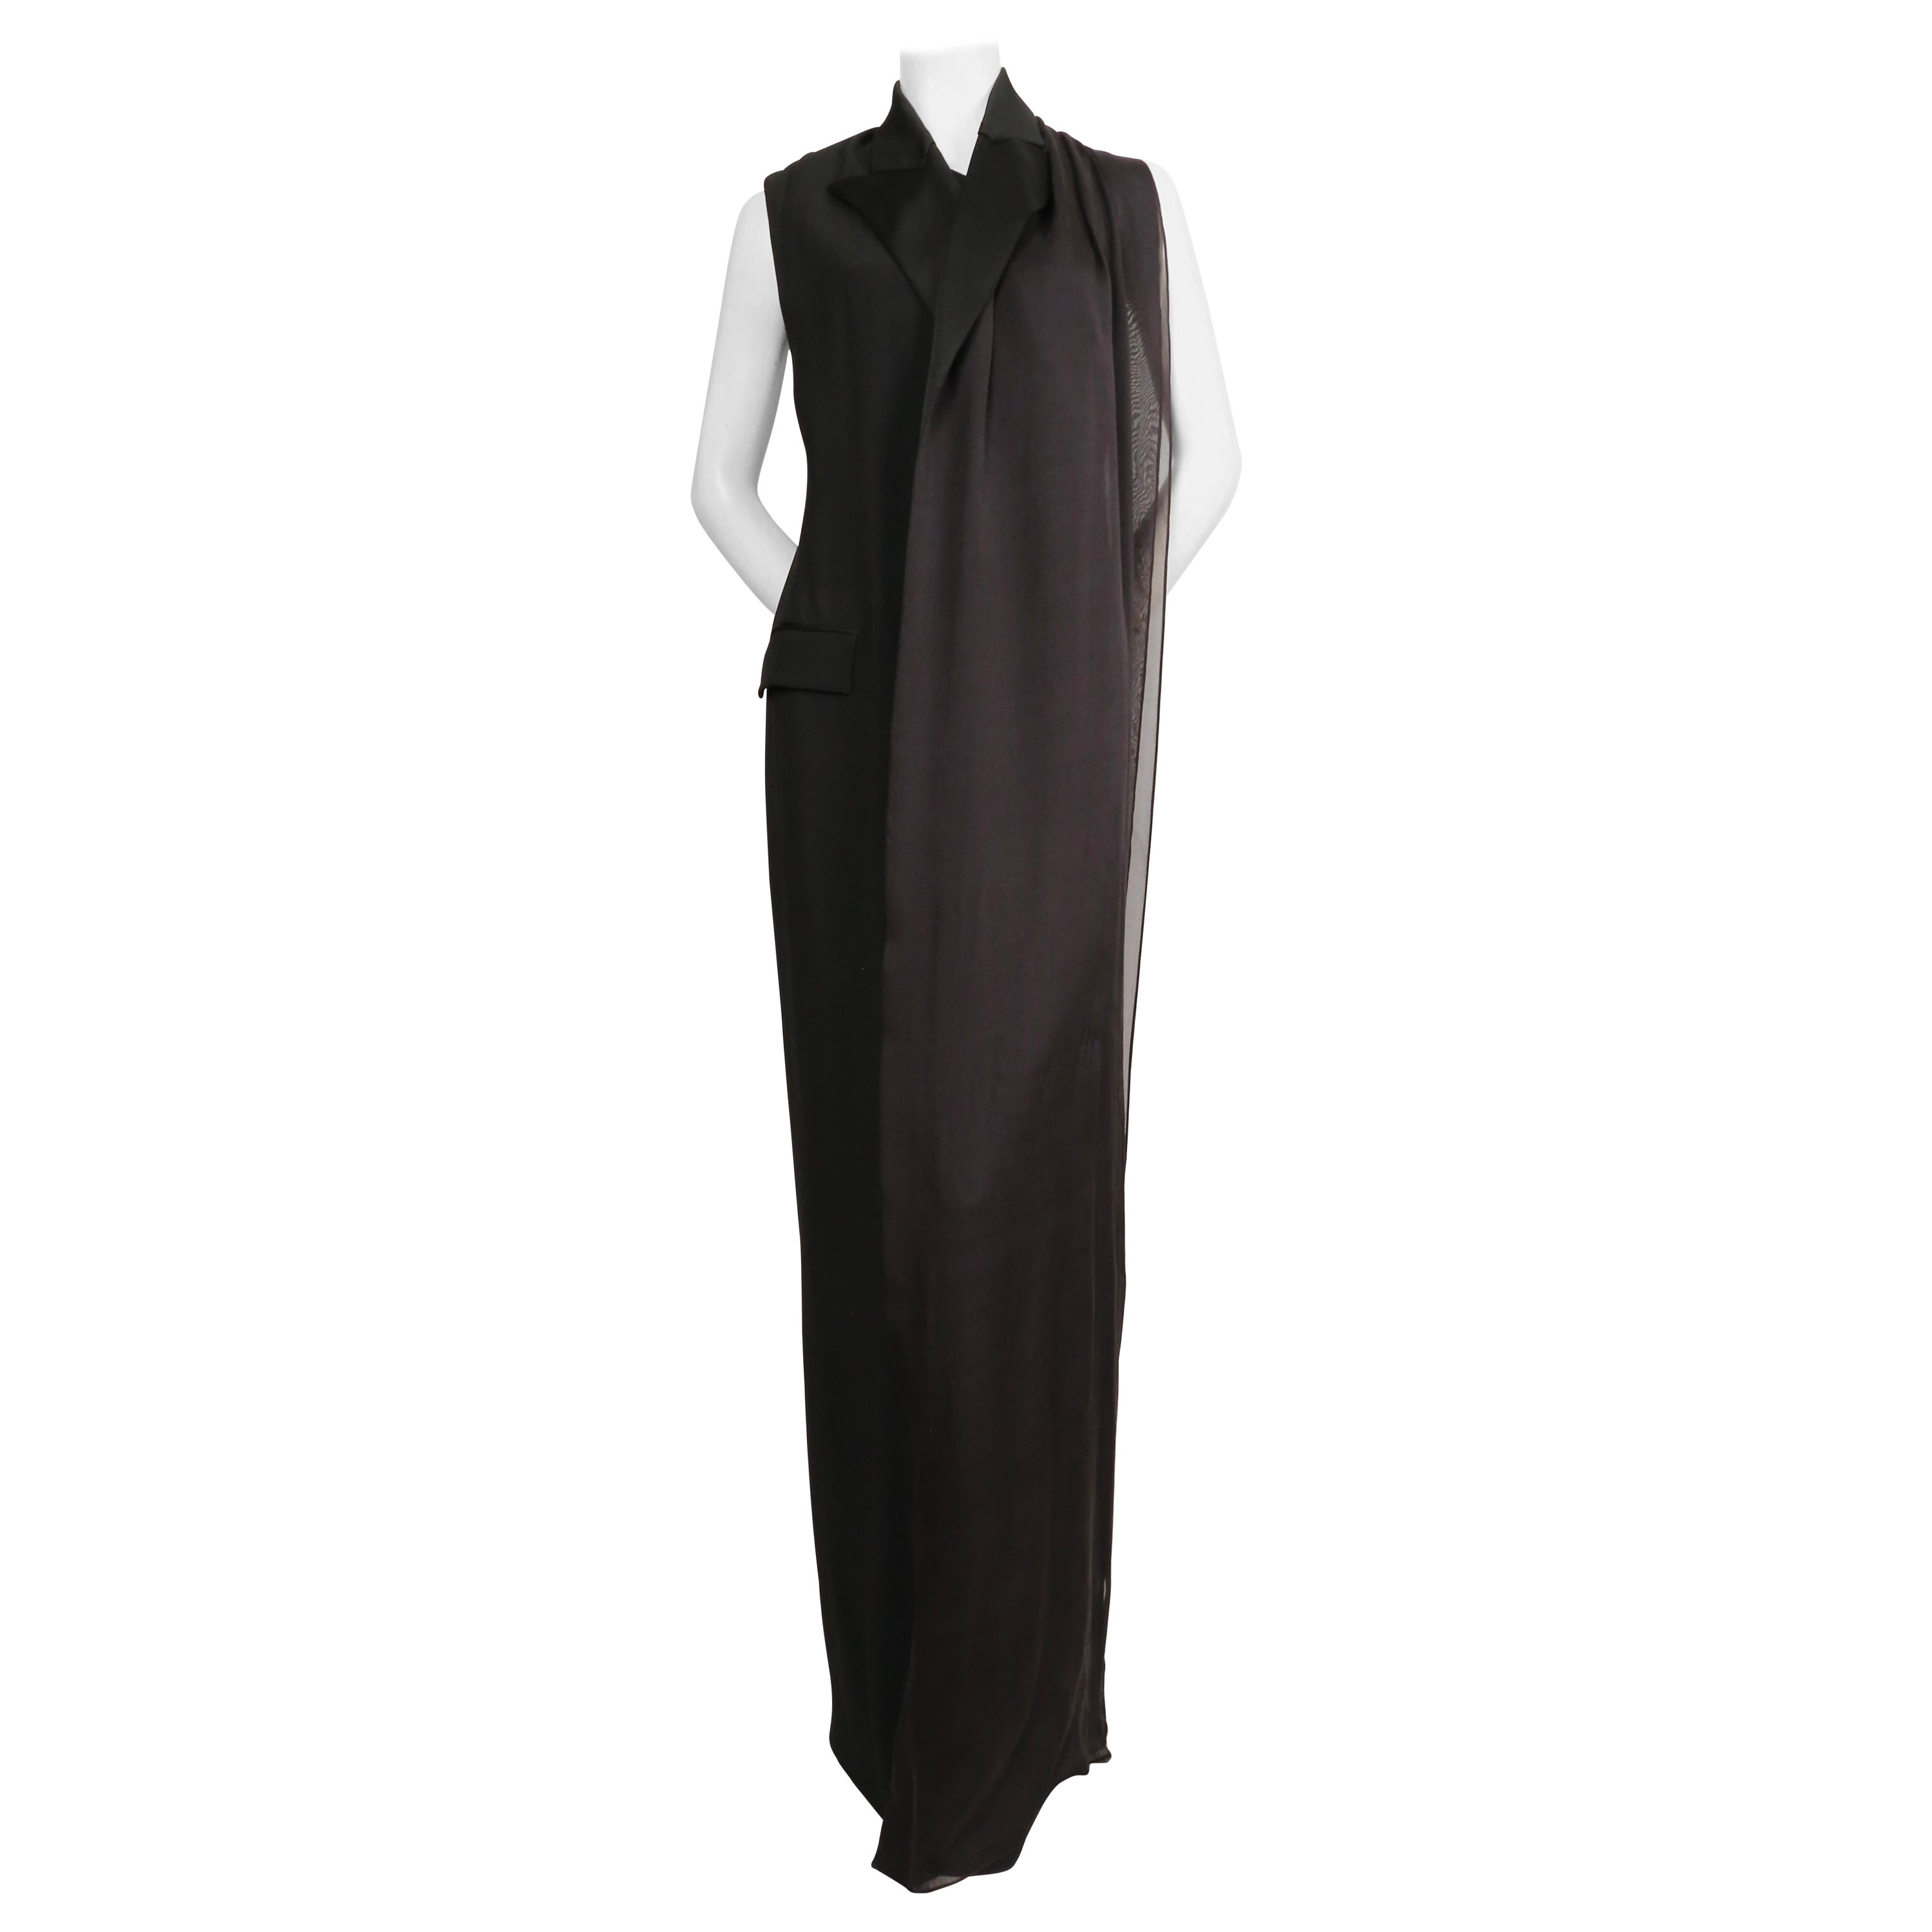 JEAN PAUL GAULTIER black tuxedo gown with draped silk scarf For Sale